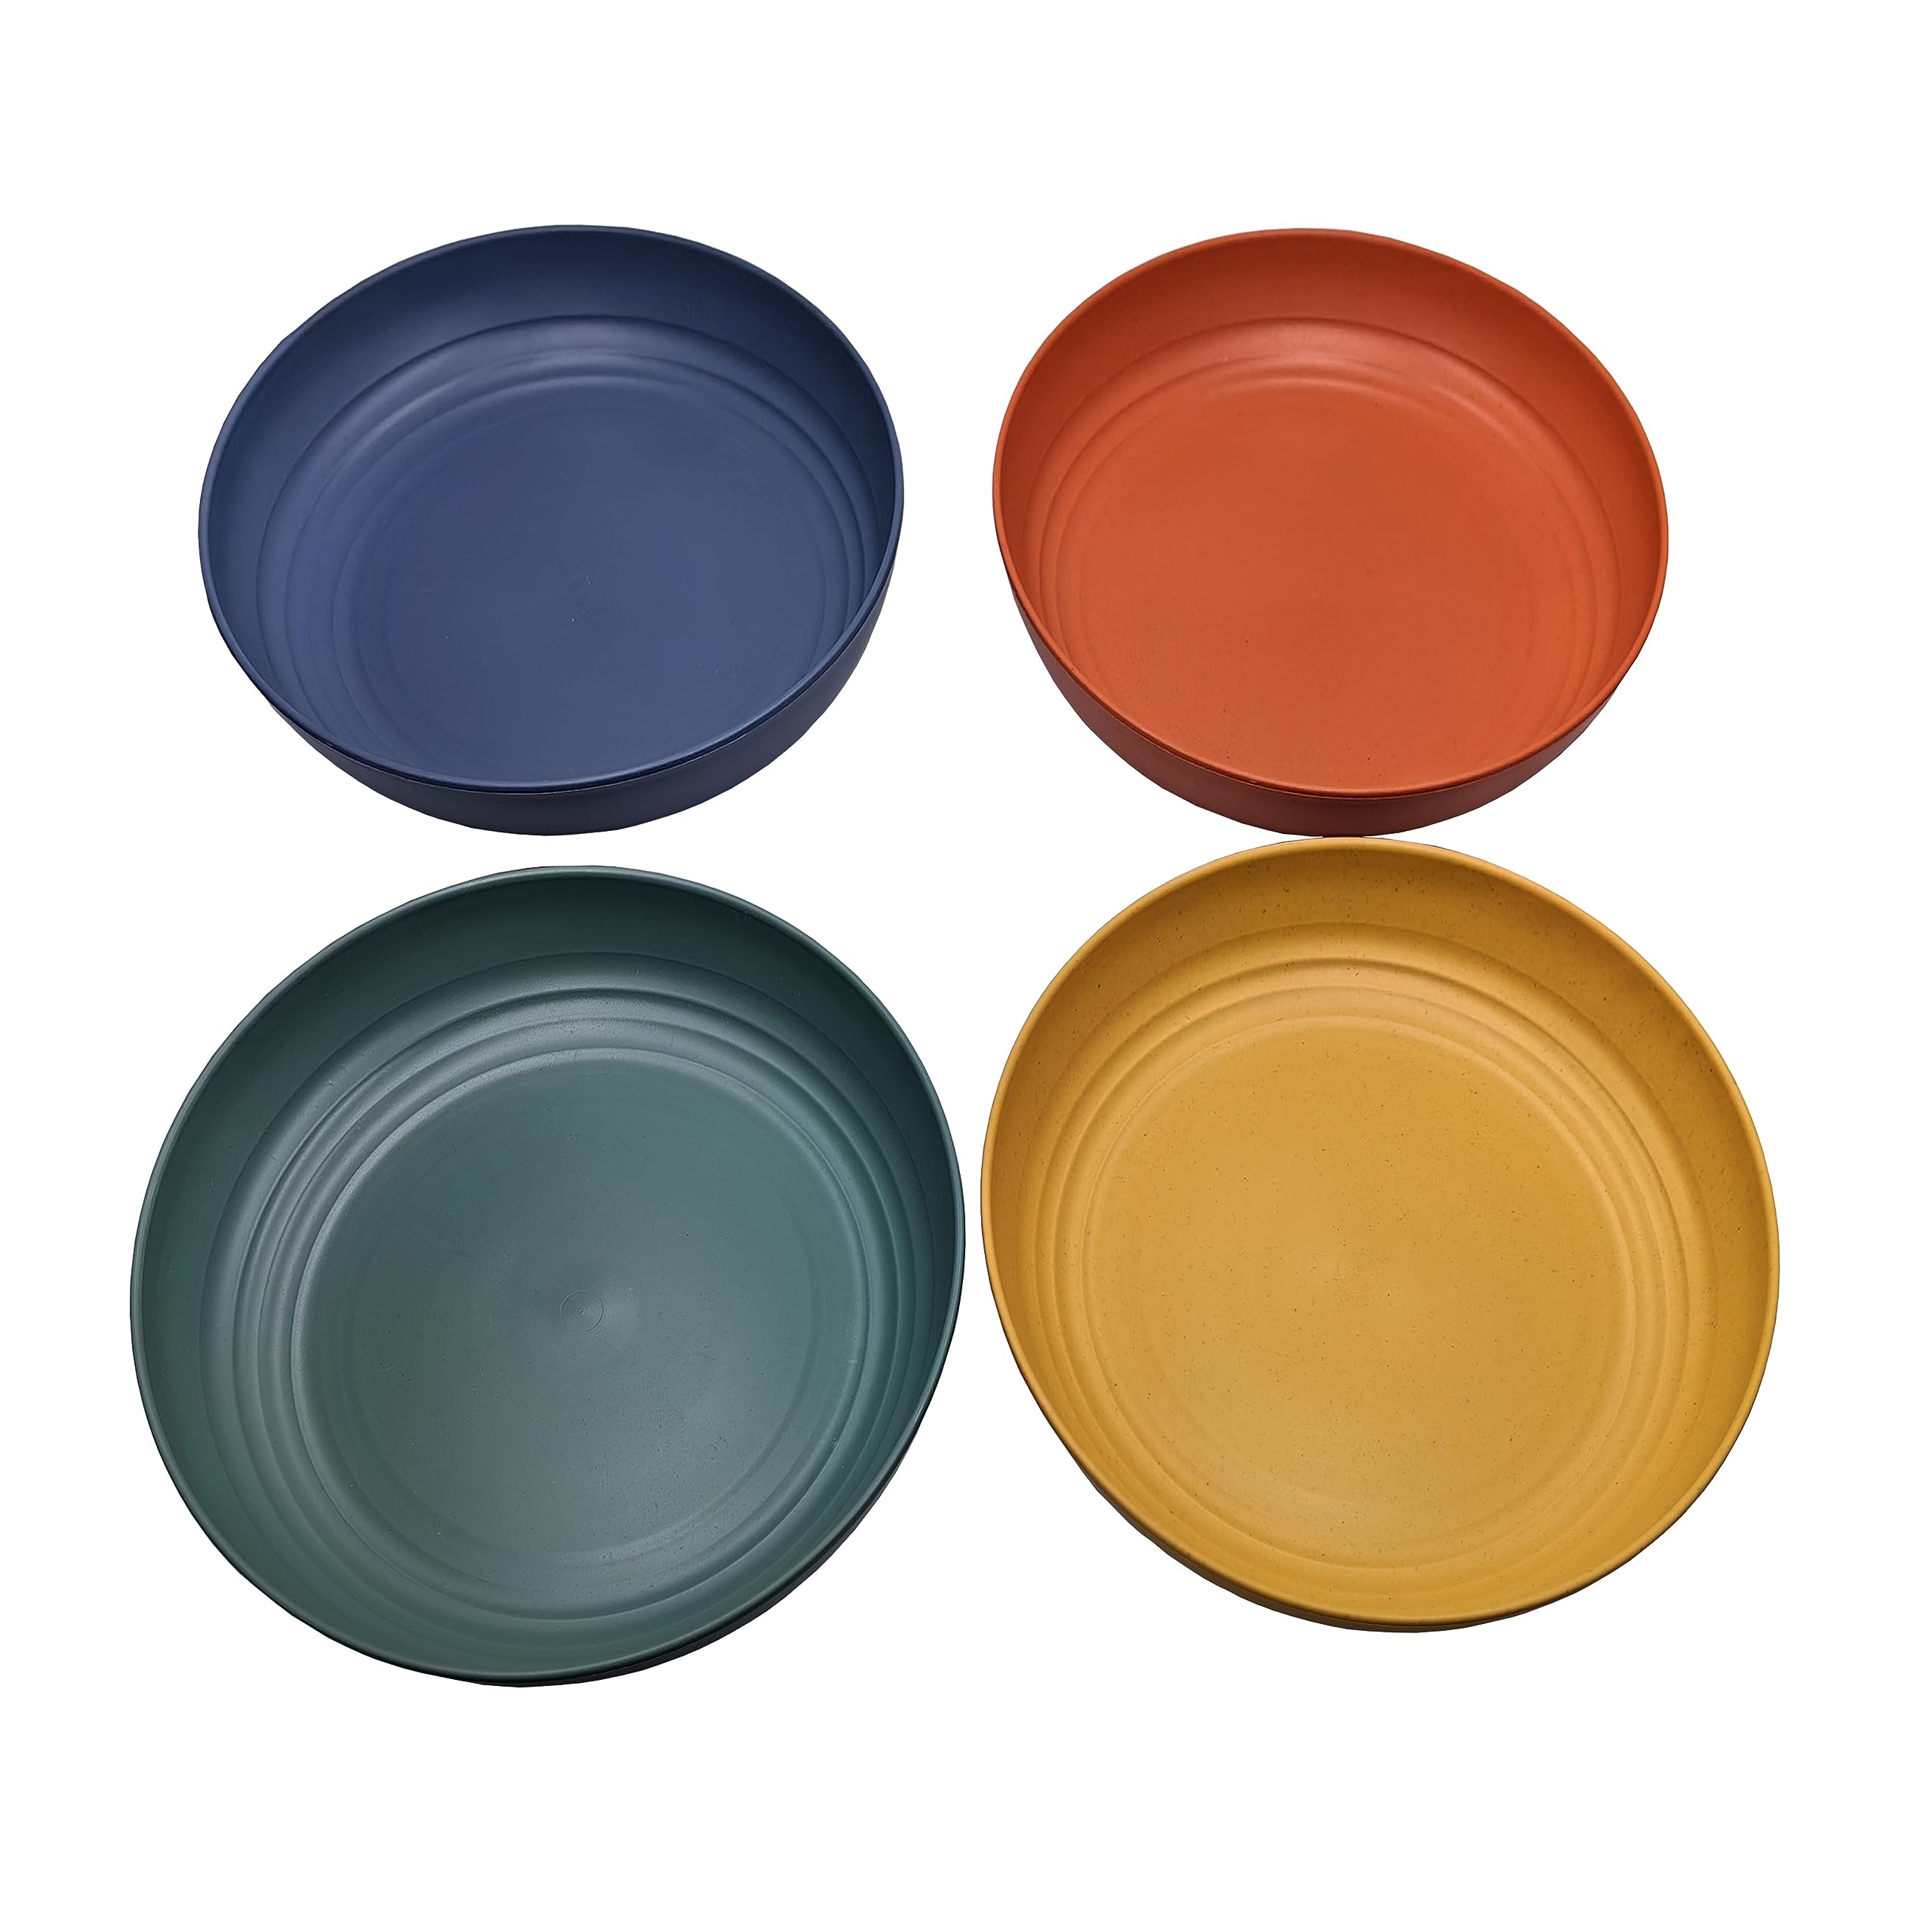 Vokop 8 Pack Wheat Straw Dinner Plates,Unbreakable Reusable Deep Plate Set-Dishwasher & Microwave Safe,Perfect for Dinner Dishes,Healthy for Kids Children & Adult-Round, 4pcs 10in & 4pcs 8in